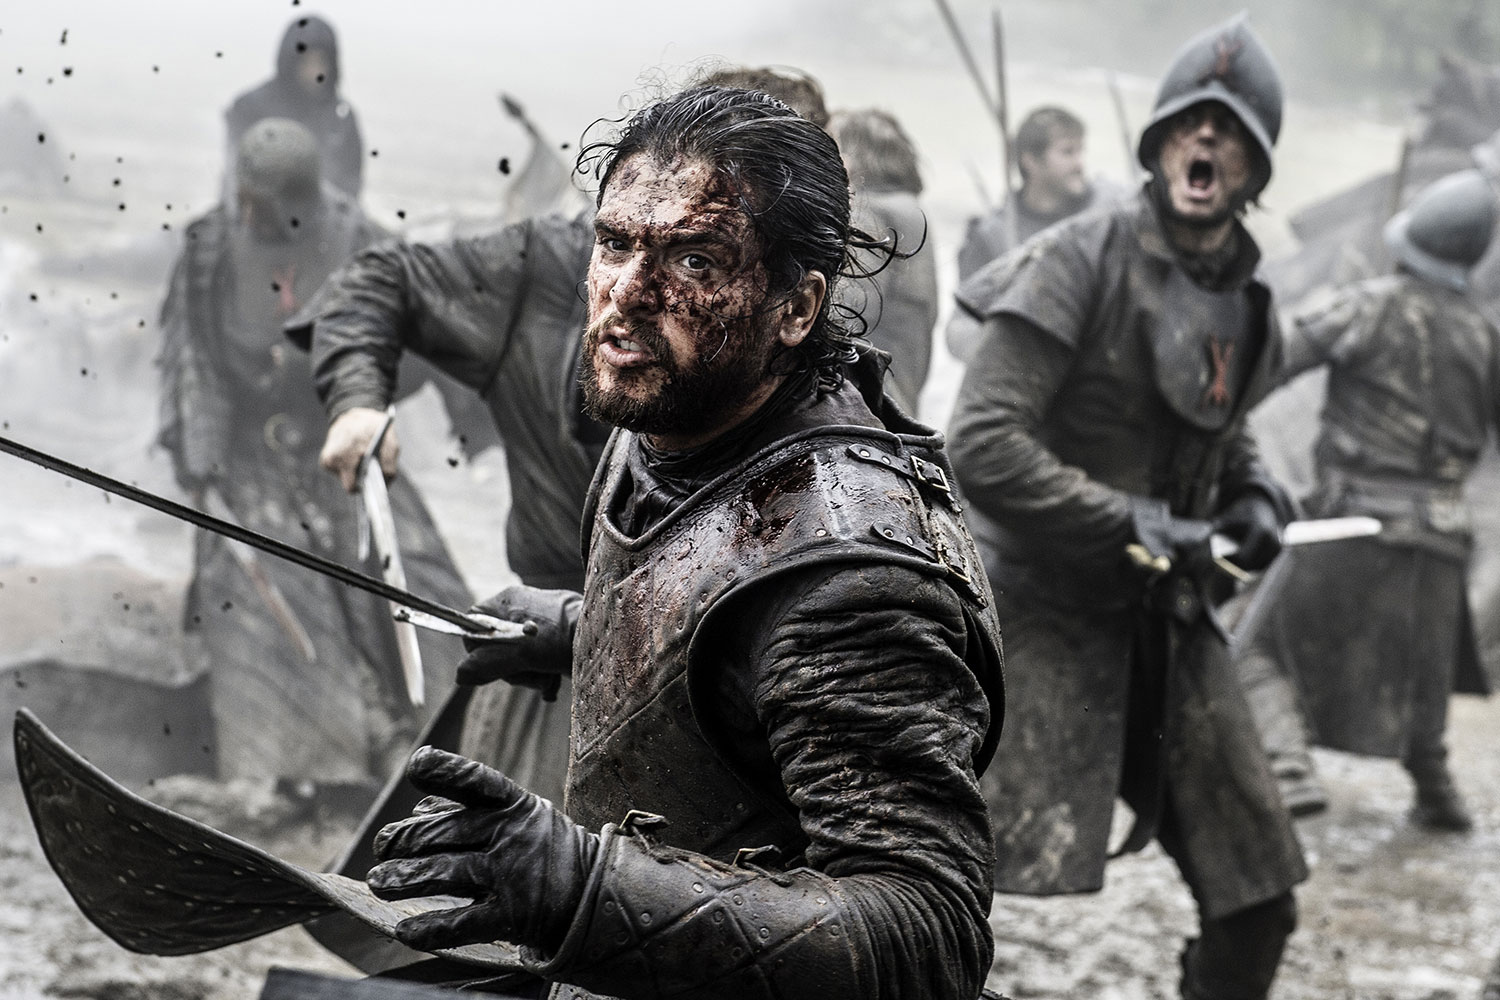 68th emmy nominations kit harington game of thrones outstanding supporting actor in a drama series